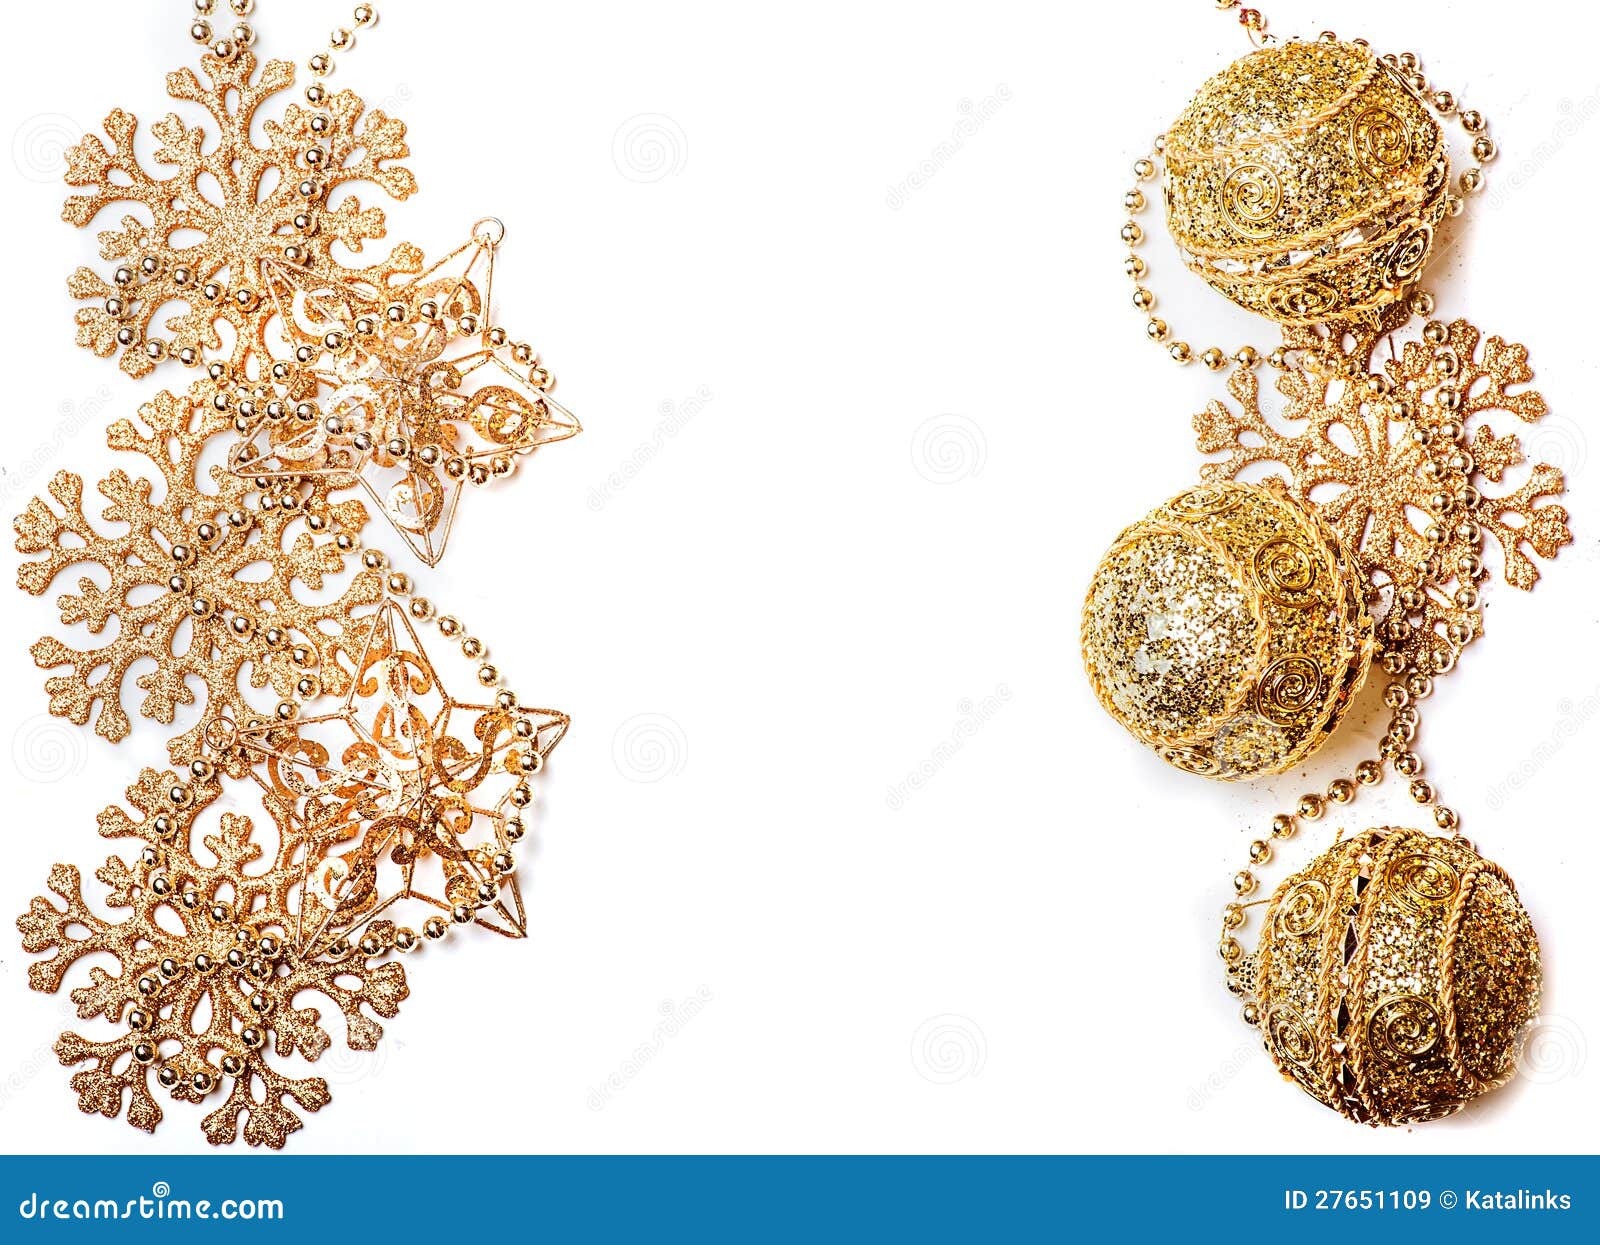 Christmas Decorations Border Royalty Free Stock Images - Image 